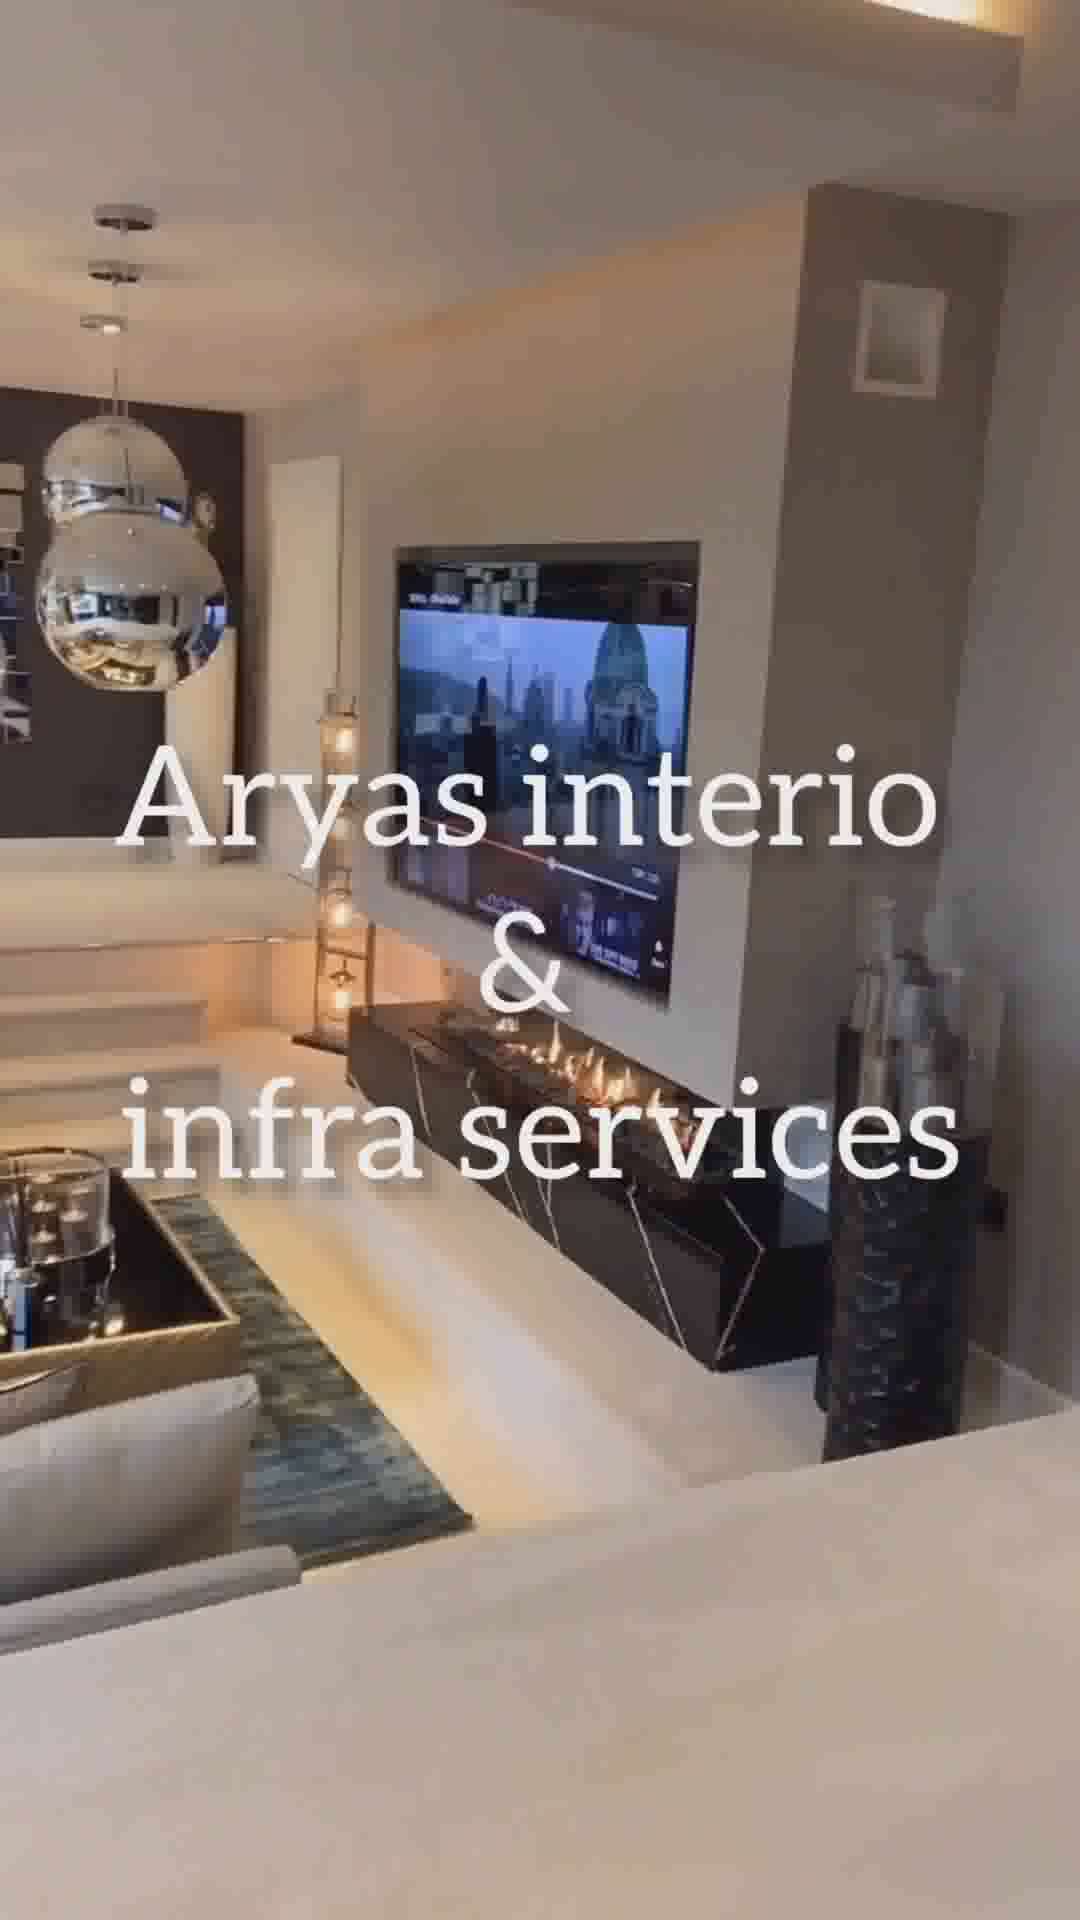 This New year give your home a new look, luxury flat interiors services by Design Interios a unit of Aryas interio & Infra Group,
Provide complete end to end Professional Construction & interior Services in Delhi Ncr, Gurugram, Ghaziabad, Noida, Greater Noida, Faridabad, chandigarh, Manali and Shimla. Contact us right now for any interior or renovation work, call us @ +91-7018188569 &
Visit our website at www.designinterios.com
Follow us on Instagram #aryasinterio and Facebook @aryasinterio .
#uttarpradesh #construction_himachal
#noidainterior #noida #delhincr #delhi #Delhihome  #noidaconstruction #interiordesign #interior #interiors #interiordesigner #interiordecor #interiorstyling #delhiinteriors #greaternoida #faridabad #ghaziabadinterior #ghaziabad  #chandigarh